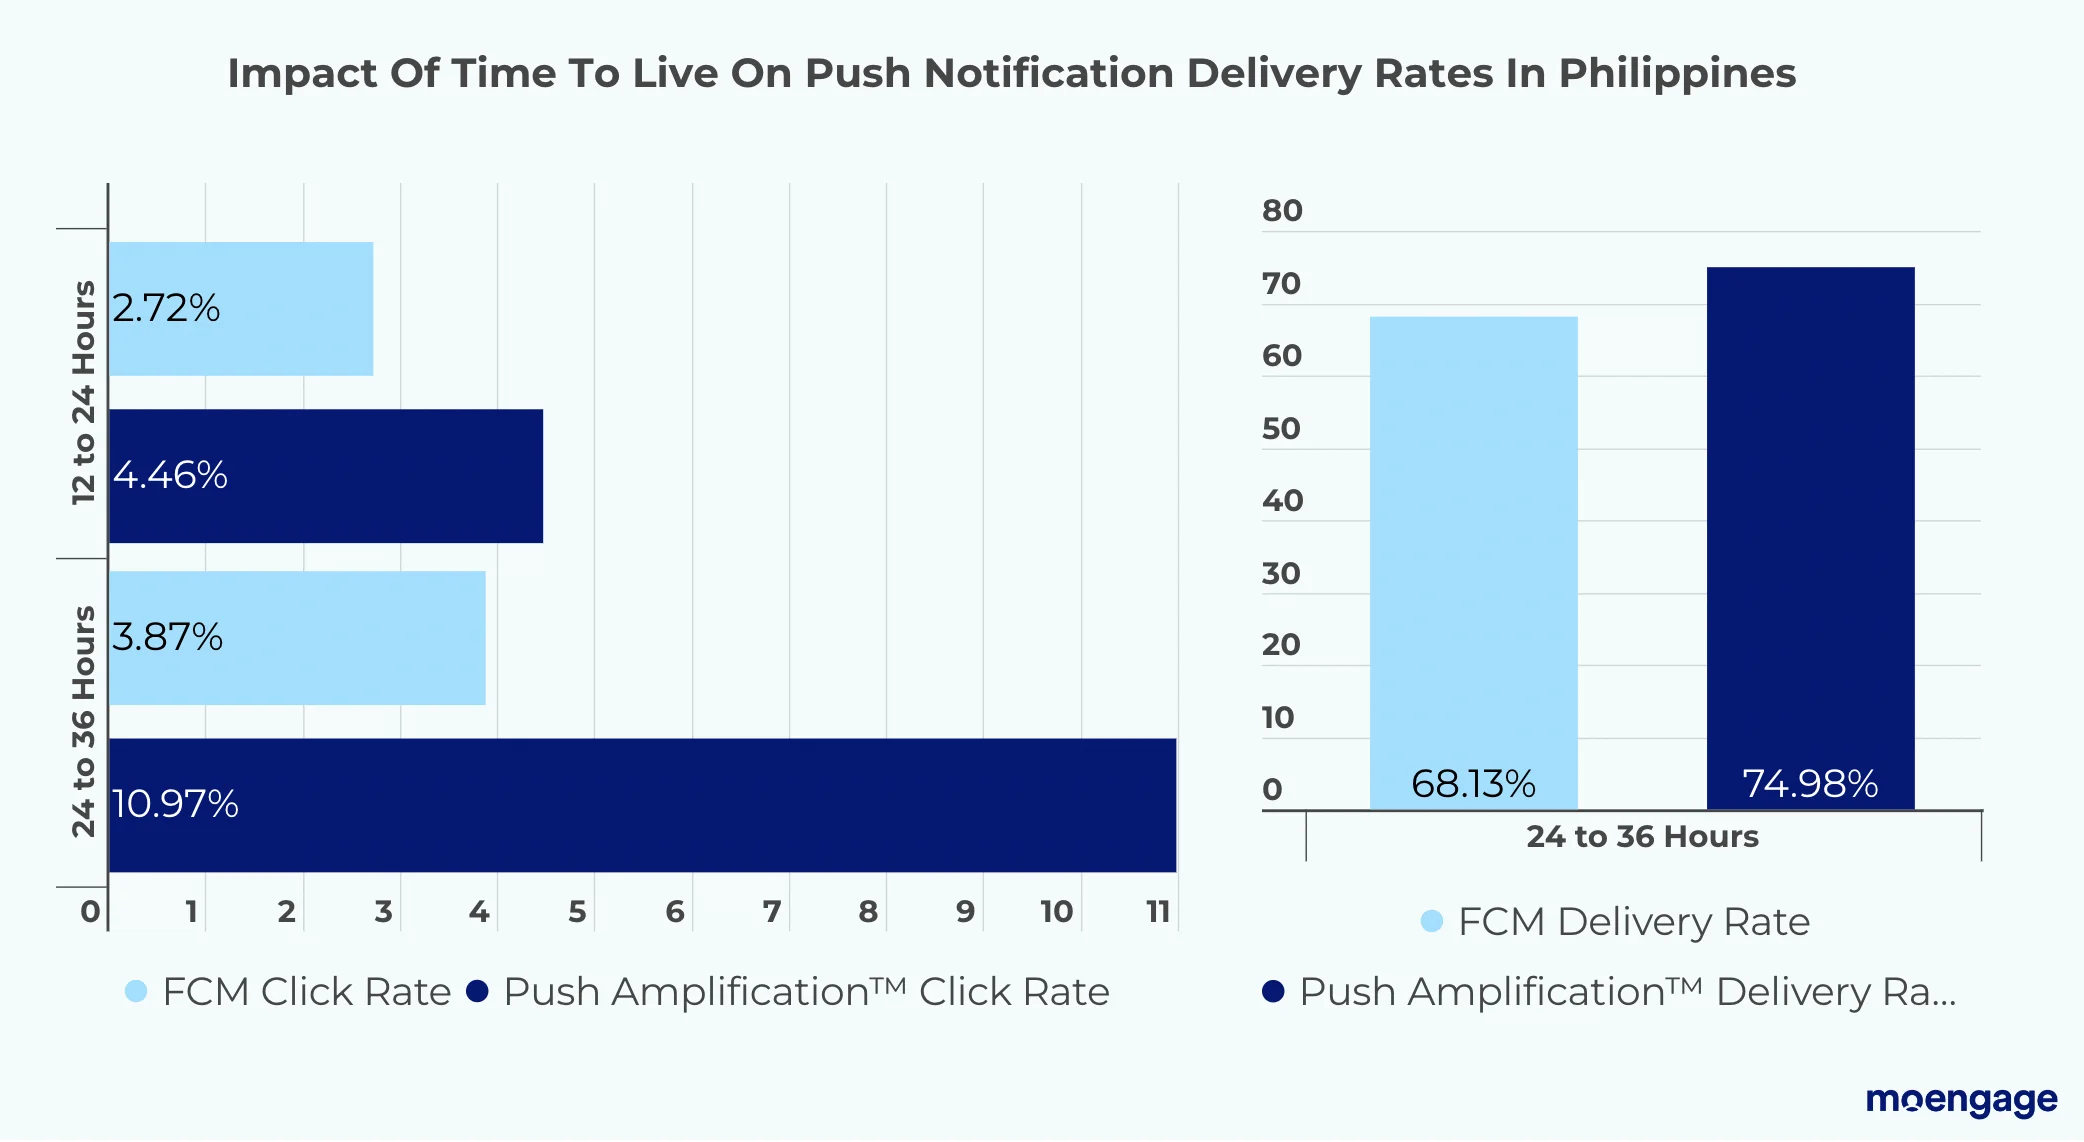 Impact of time to live on push notification delivery rate in Philippines